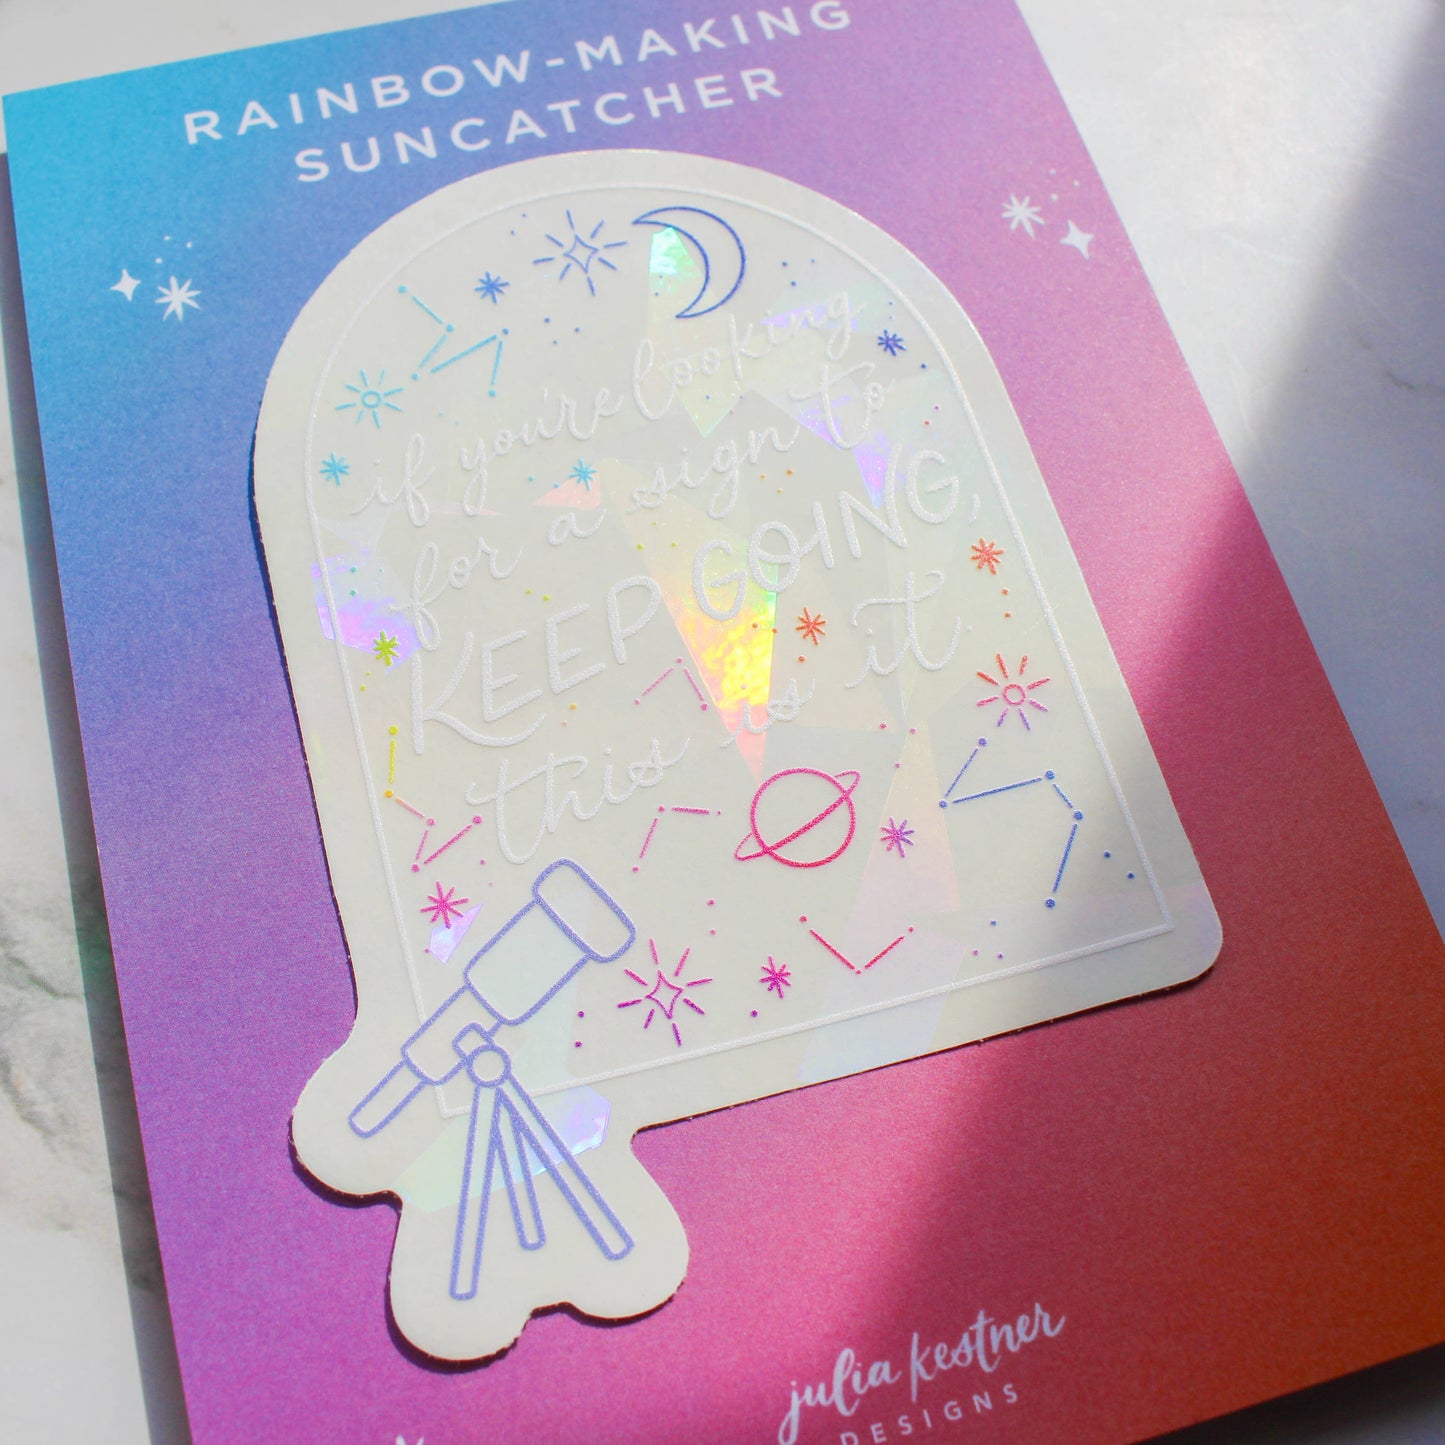 This Is Your Sign Rainbow-Making Suncatcher